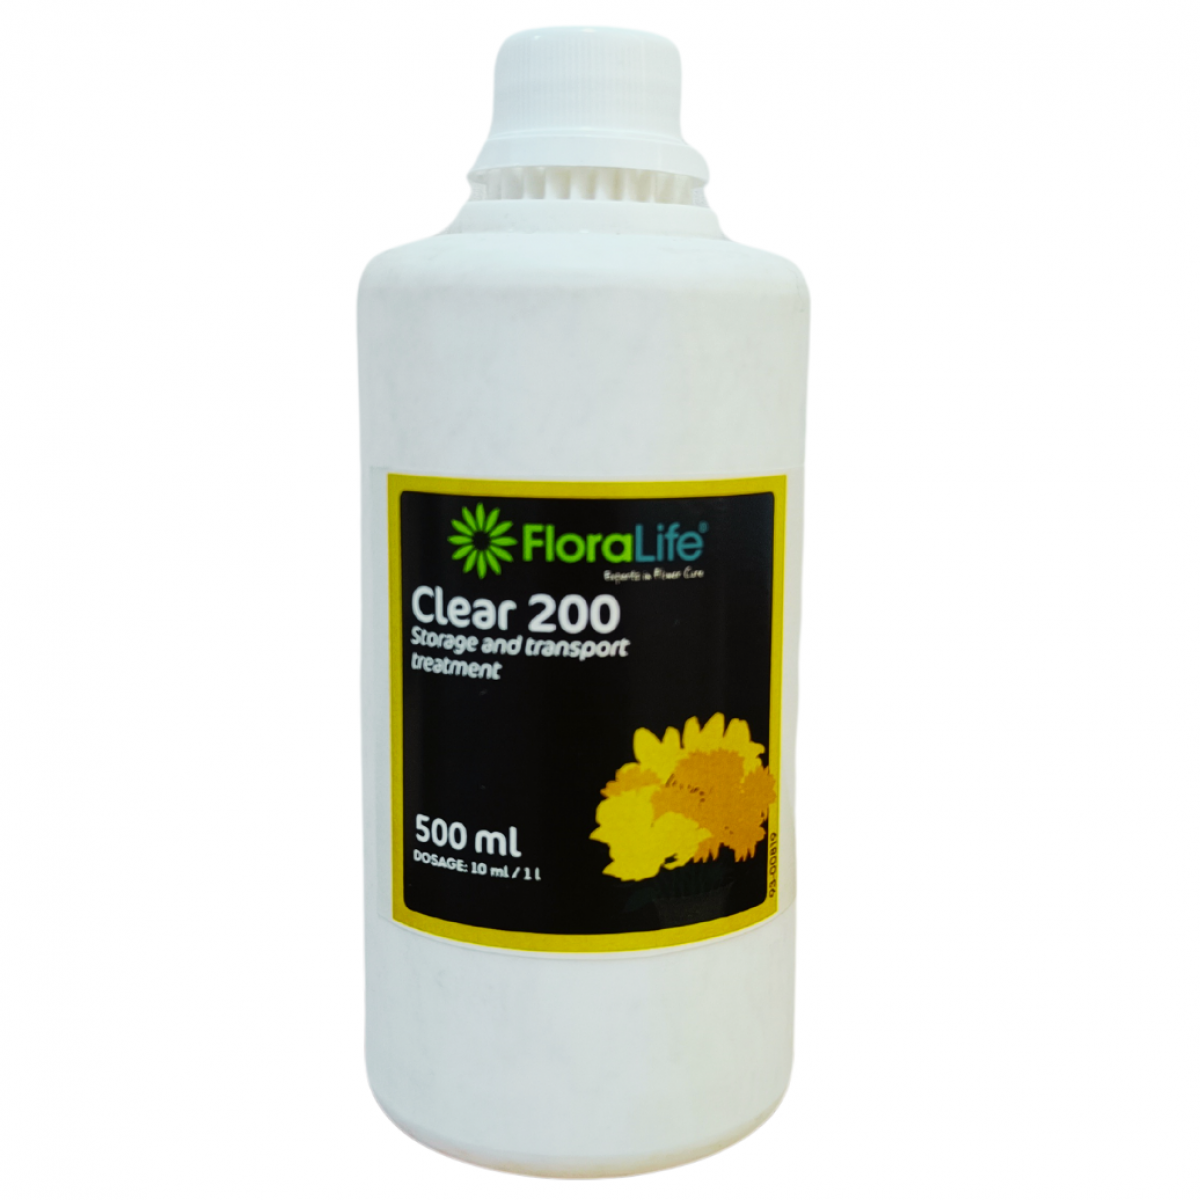 1209 Floralife Clear 200 500ml -1 No